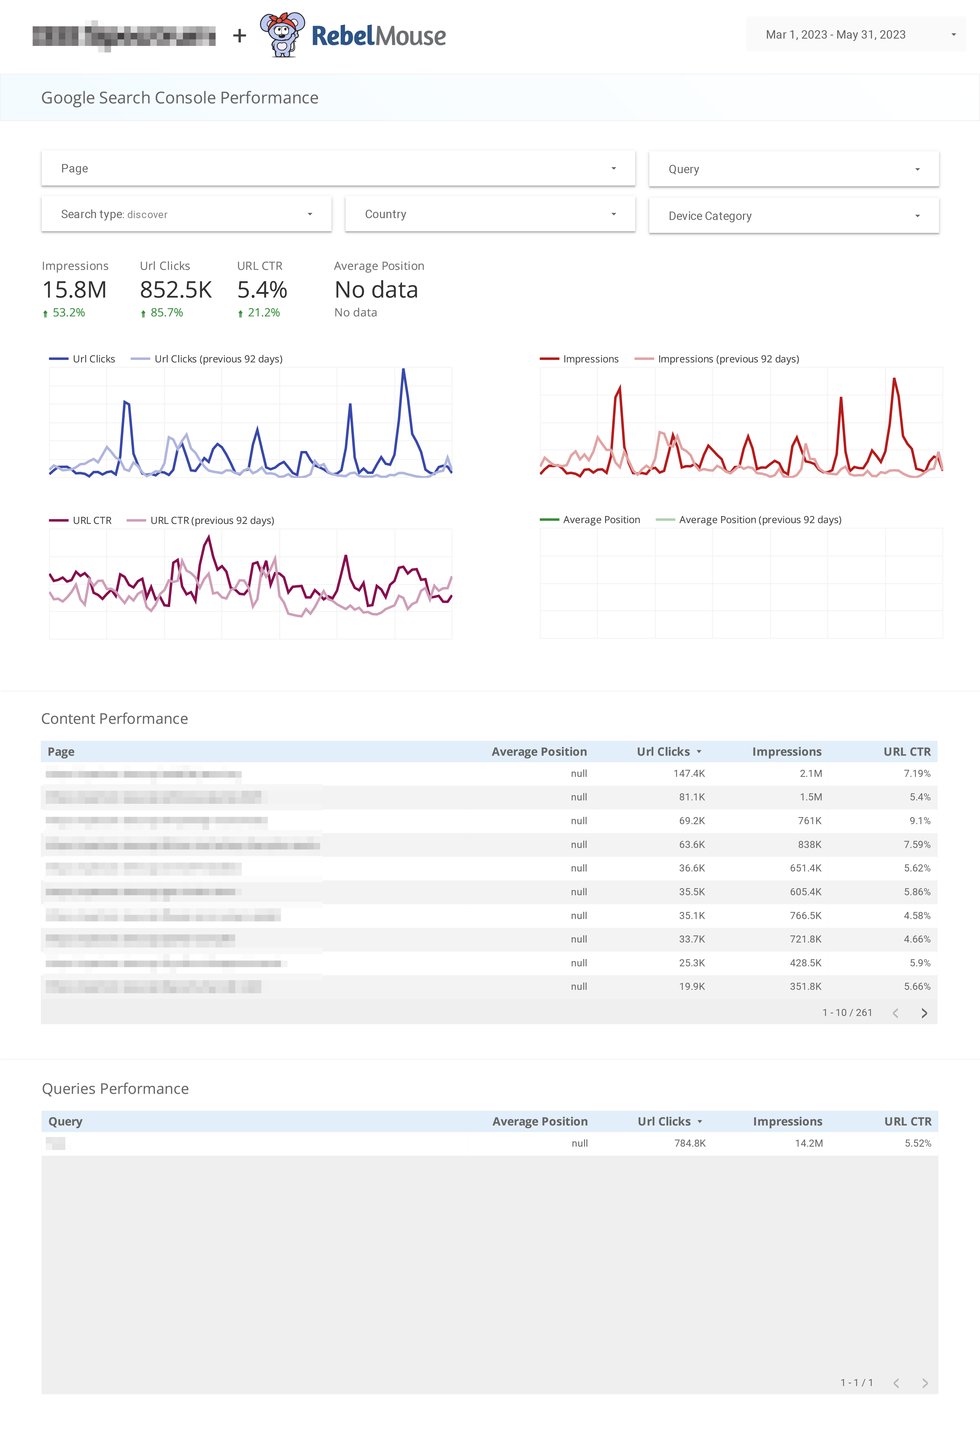 Google Search Console page of a Looker Studio dashboard customized by RebelMouse